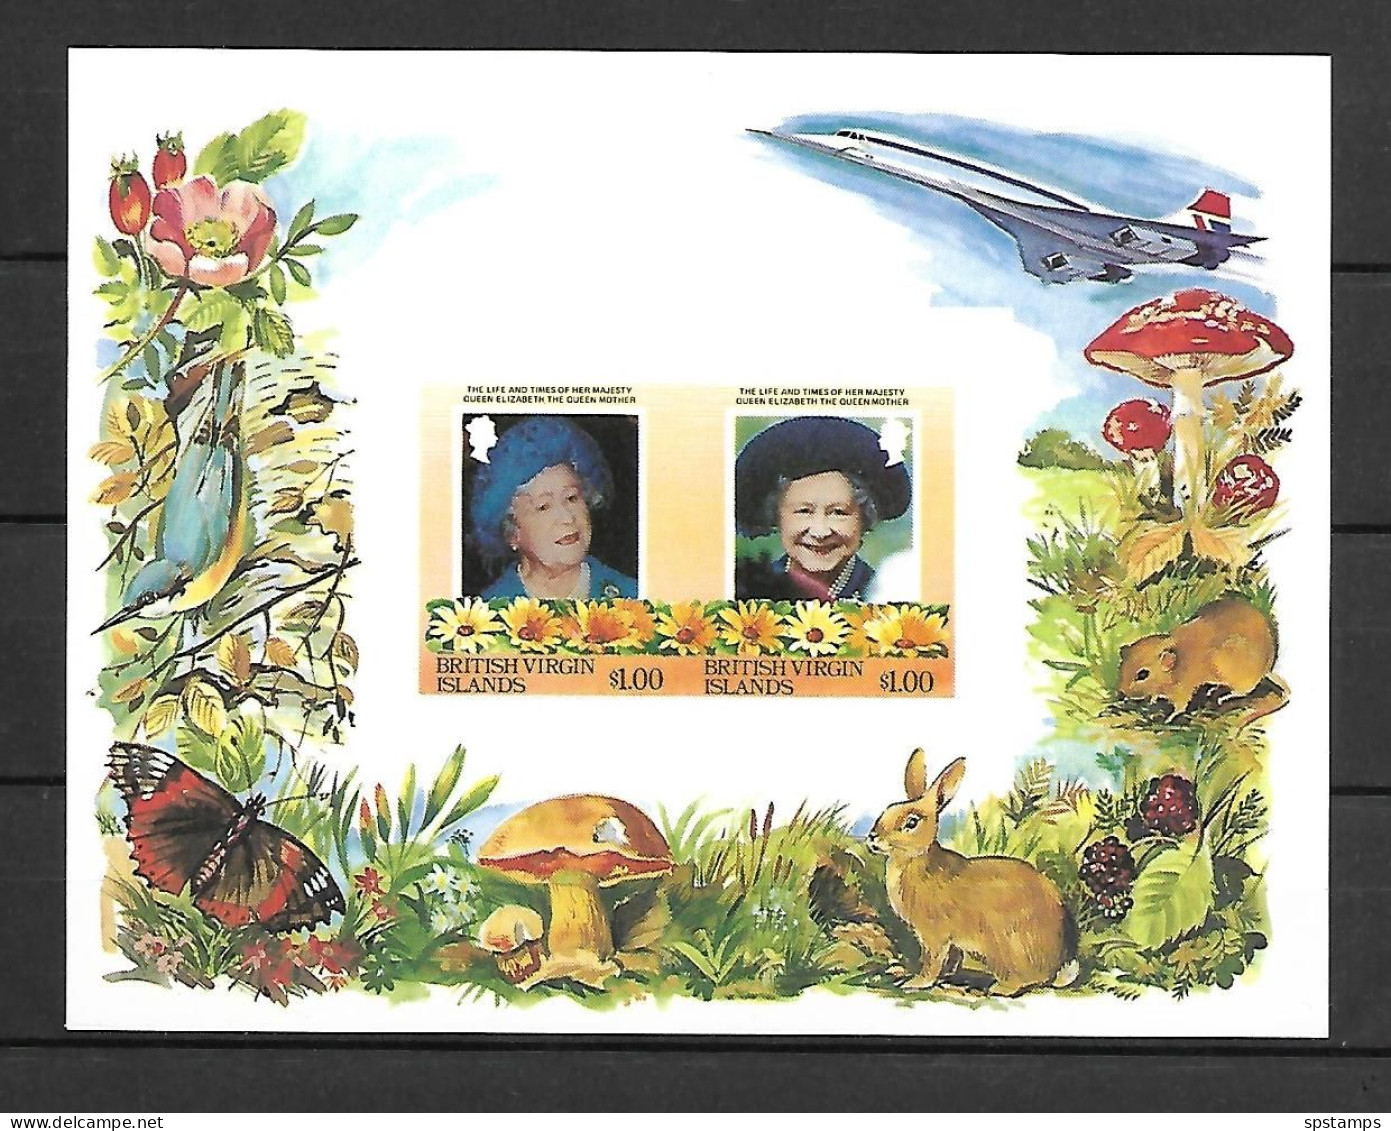 British Virgin Islands 1985 The 85th Anniversary Of The Birth Of Queen Elizabeth IMPERFORATE MS #2 MNH - Familles Royales